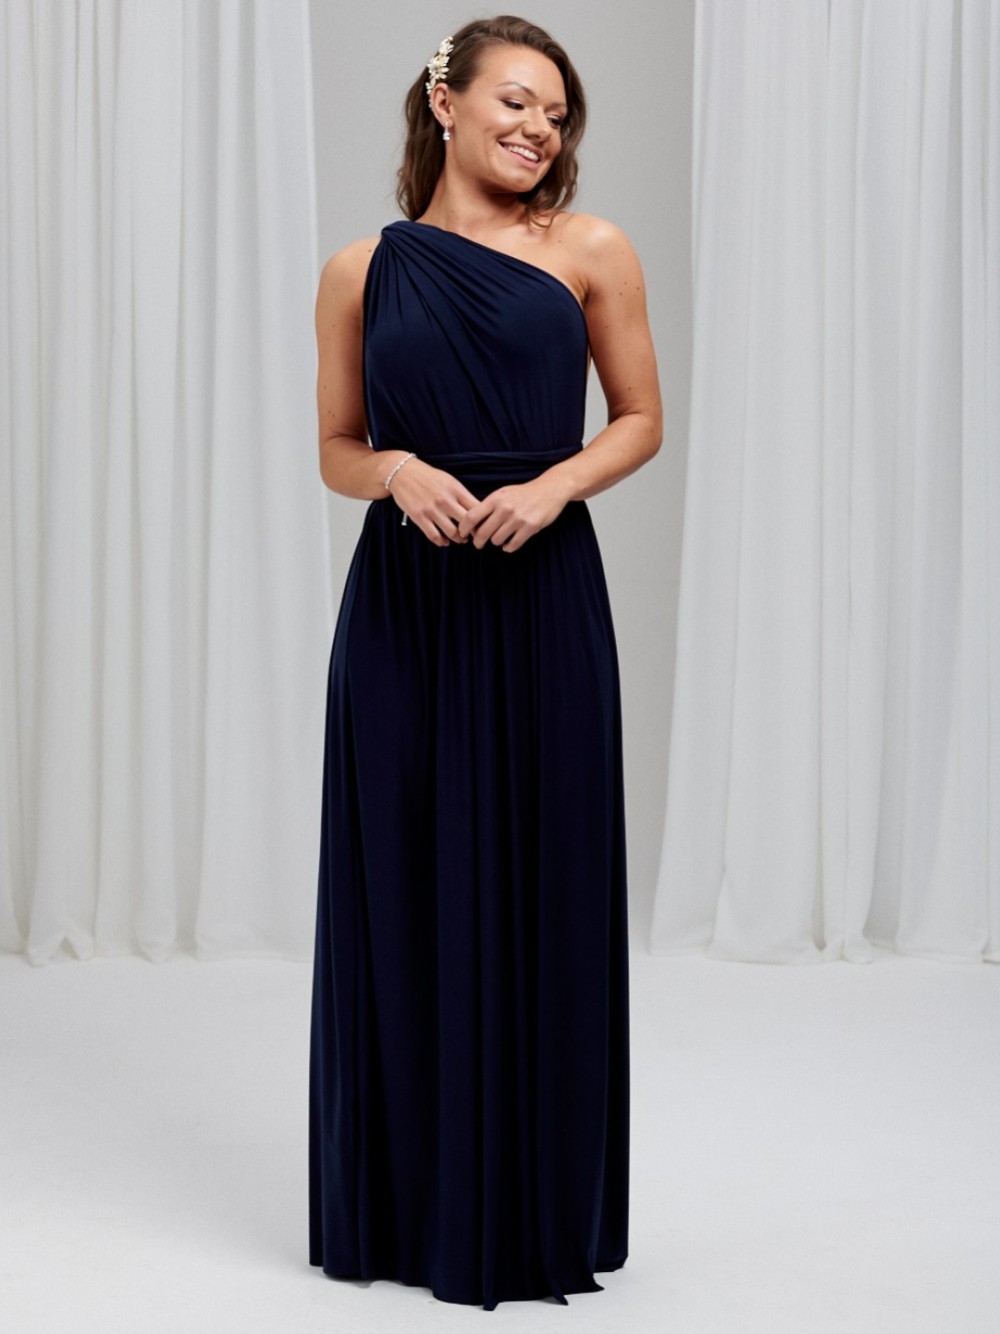 Photograph: Emily Rose Navy Multiway Bridesmaid Dress (One Size)